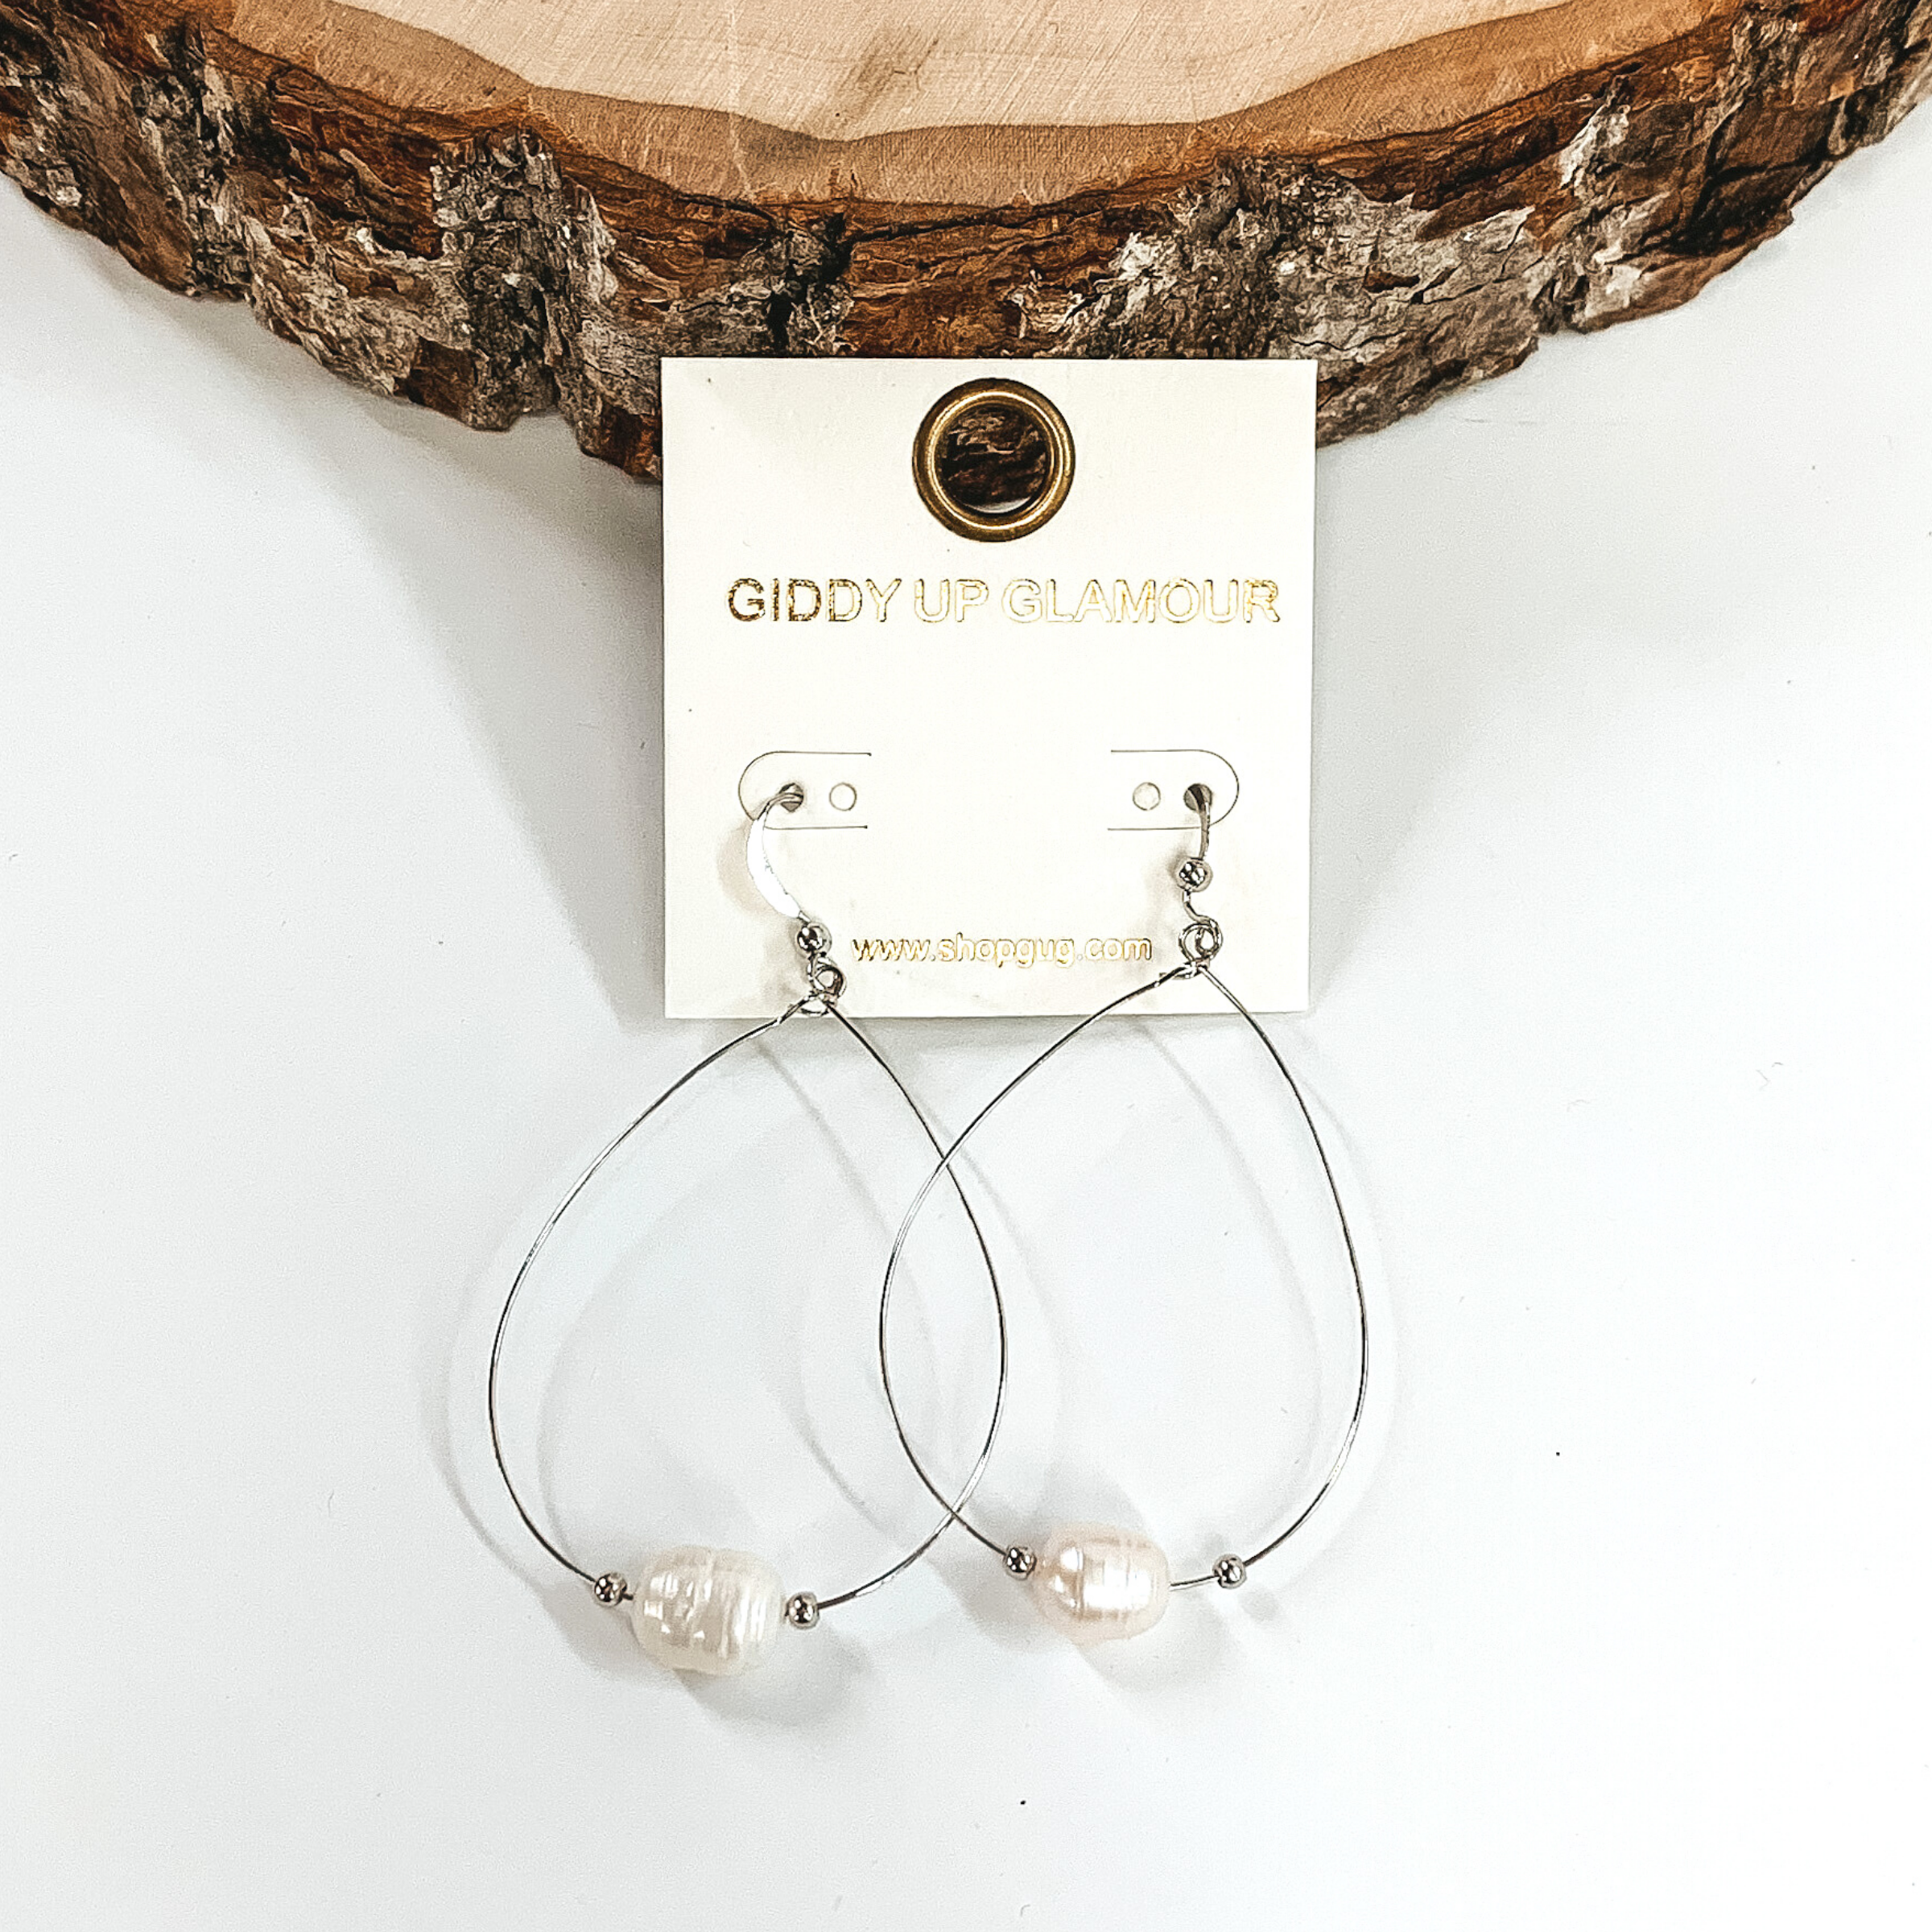 Thin silver wired earrings in a teardrop shape that includes a pearl charm with two tiny silver beads on either side of the pearl. These earrings are pictured on a white background with a piece of wood at the top. 